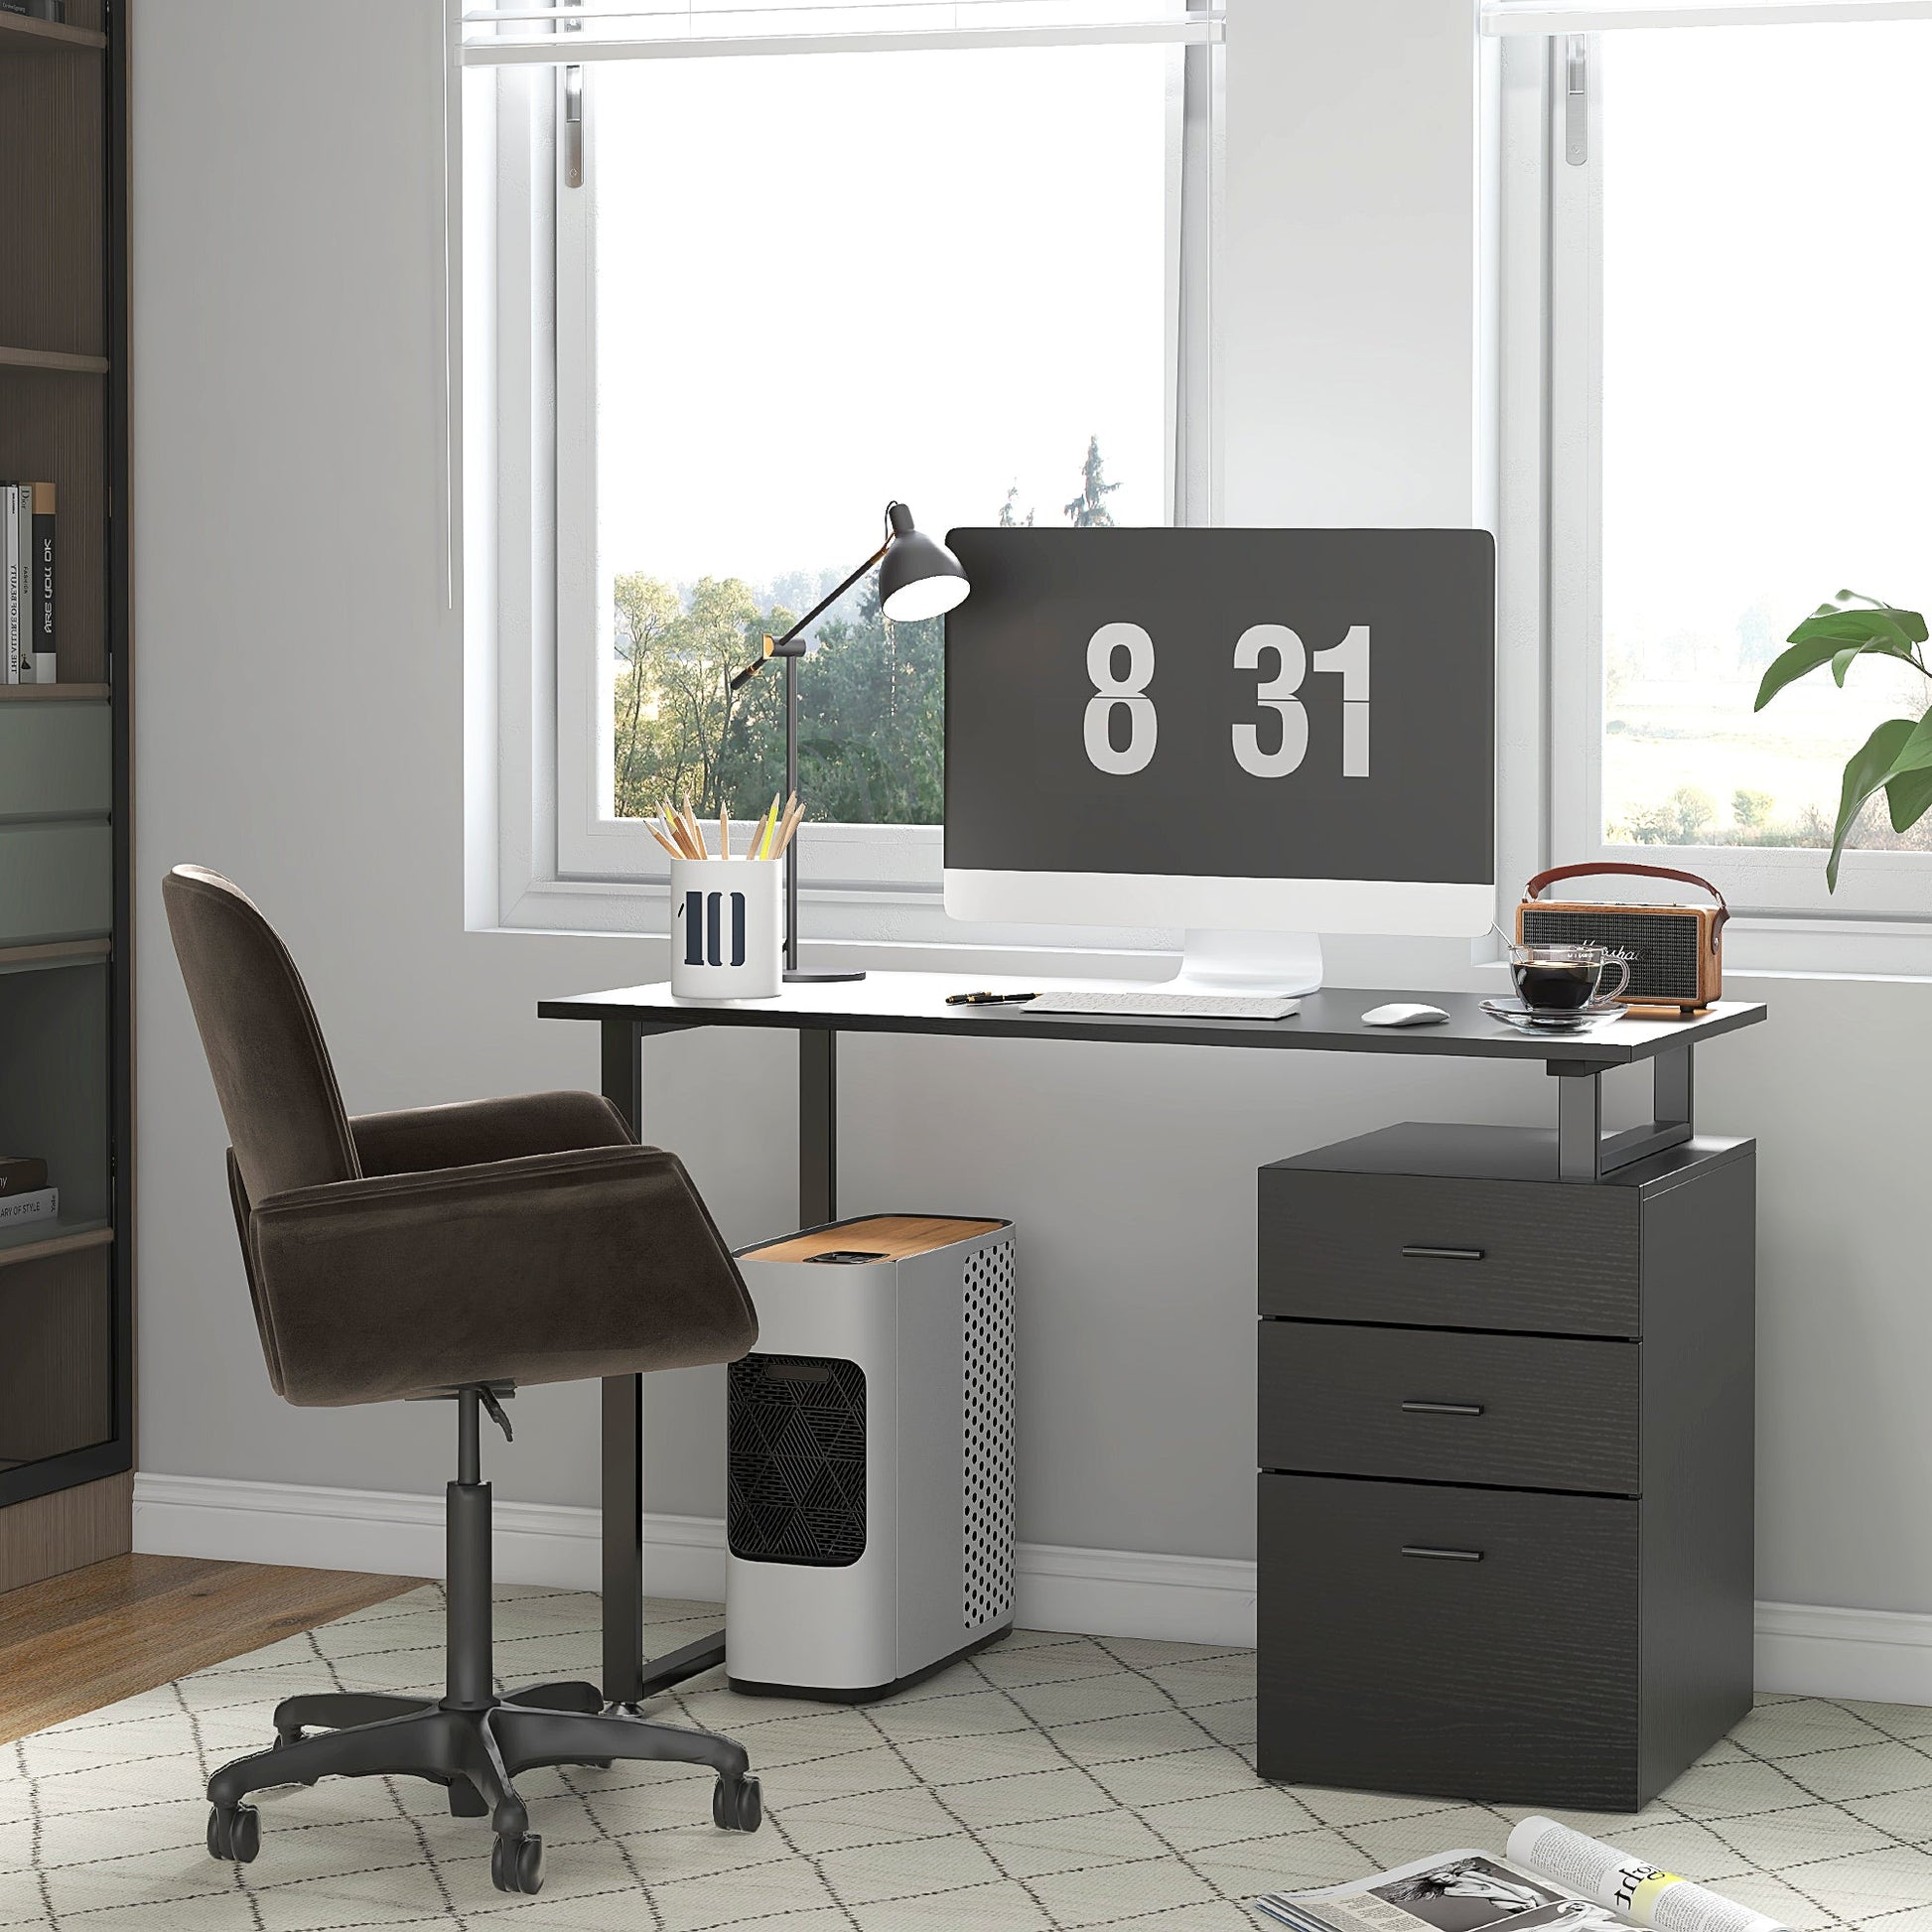 47" Computer Desk with Drawers, Modern Writing Desk with Storage File Drawers for Home Office, Study, Black - Gallery Canada